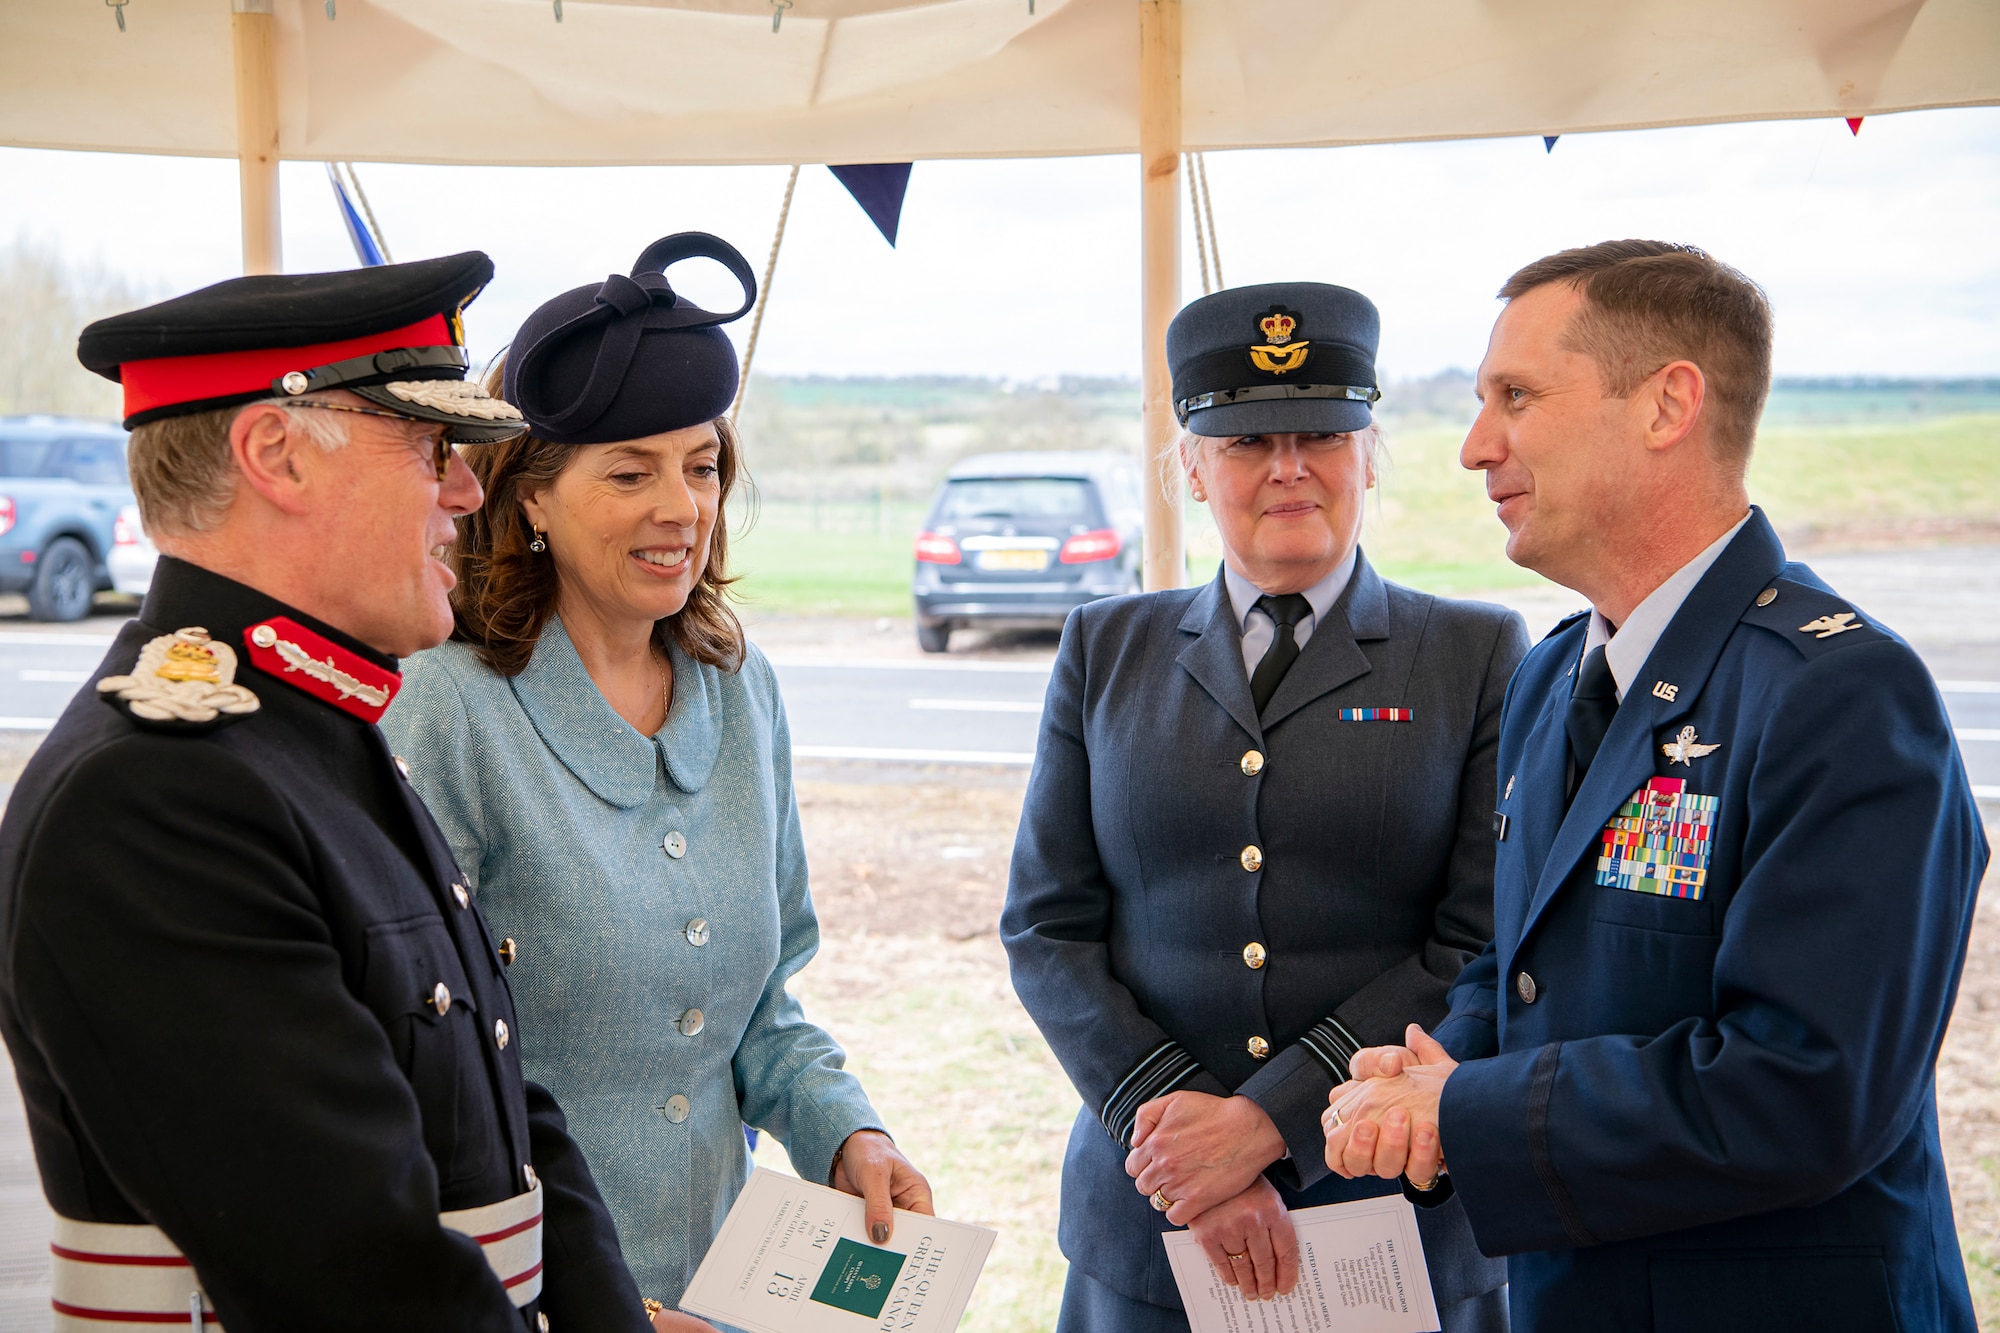 U.S. Air Force Col. Jon T. Hannah, left, 422d Air Base Group commander, speaks with James Saunders-Watson, right,  Lord-Lieutenant of Northamptonshire, and other distinguished guests prior to the Queen’s Green Canopy event at RAF Croughton, England, April 13, 2022. The event celebrated the Queen’s Platinum Jubilee initiative, marking the 70th year of her reign. During the event, trees were planted to create a legacy in honor of the queen’s leadership of the nation. (U.S. Air Force photo by Staff Sgt. Eugene Oliver)